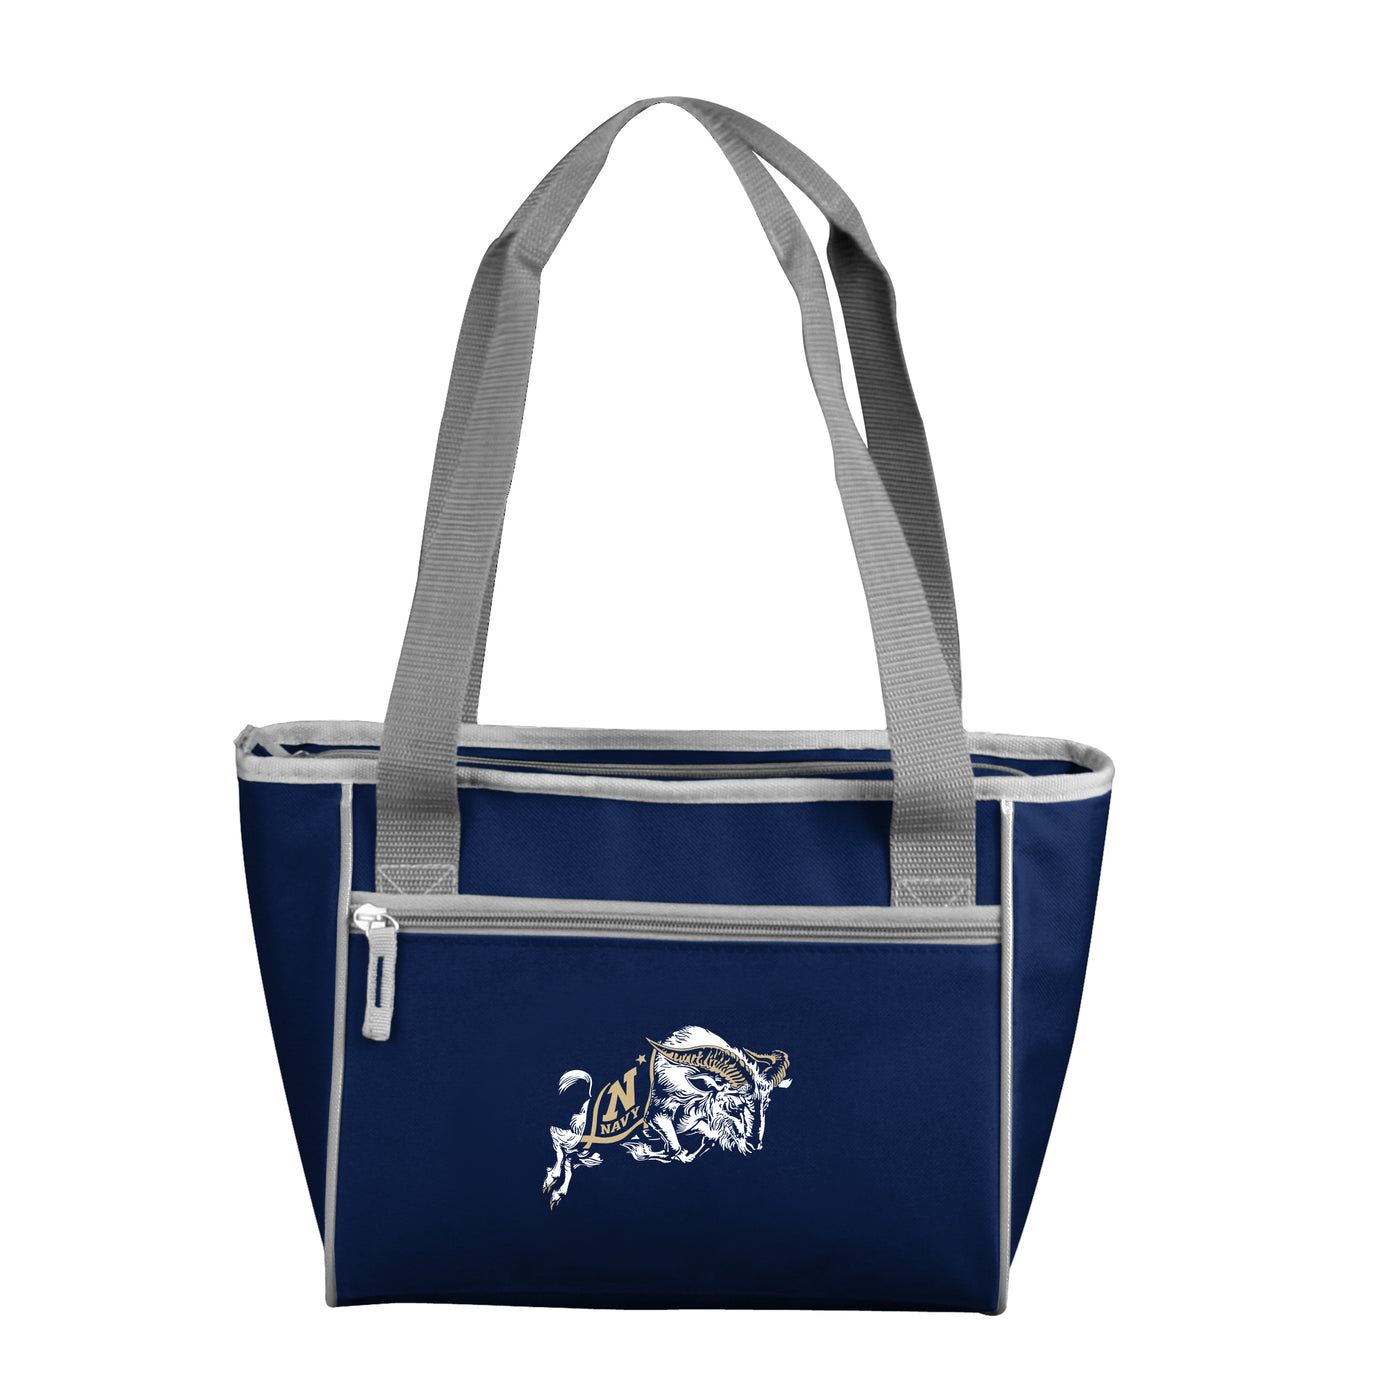 Naval Academy 16 Can Cooler Tote